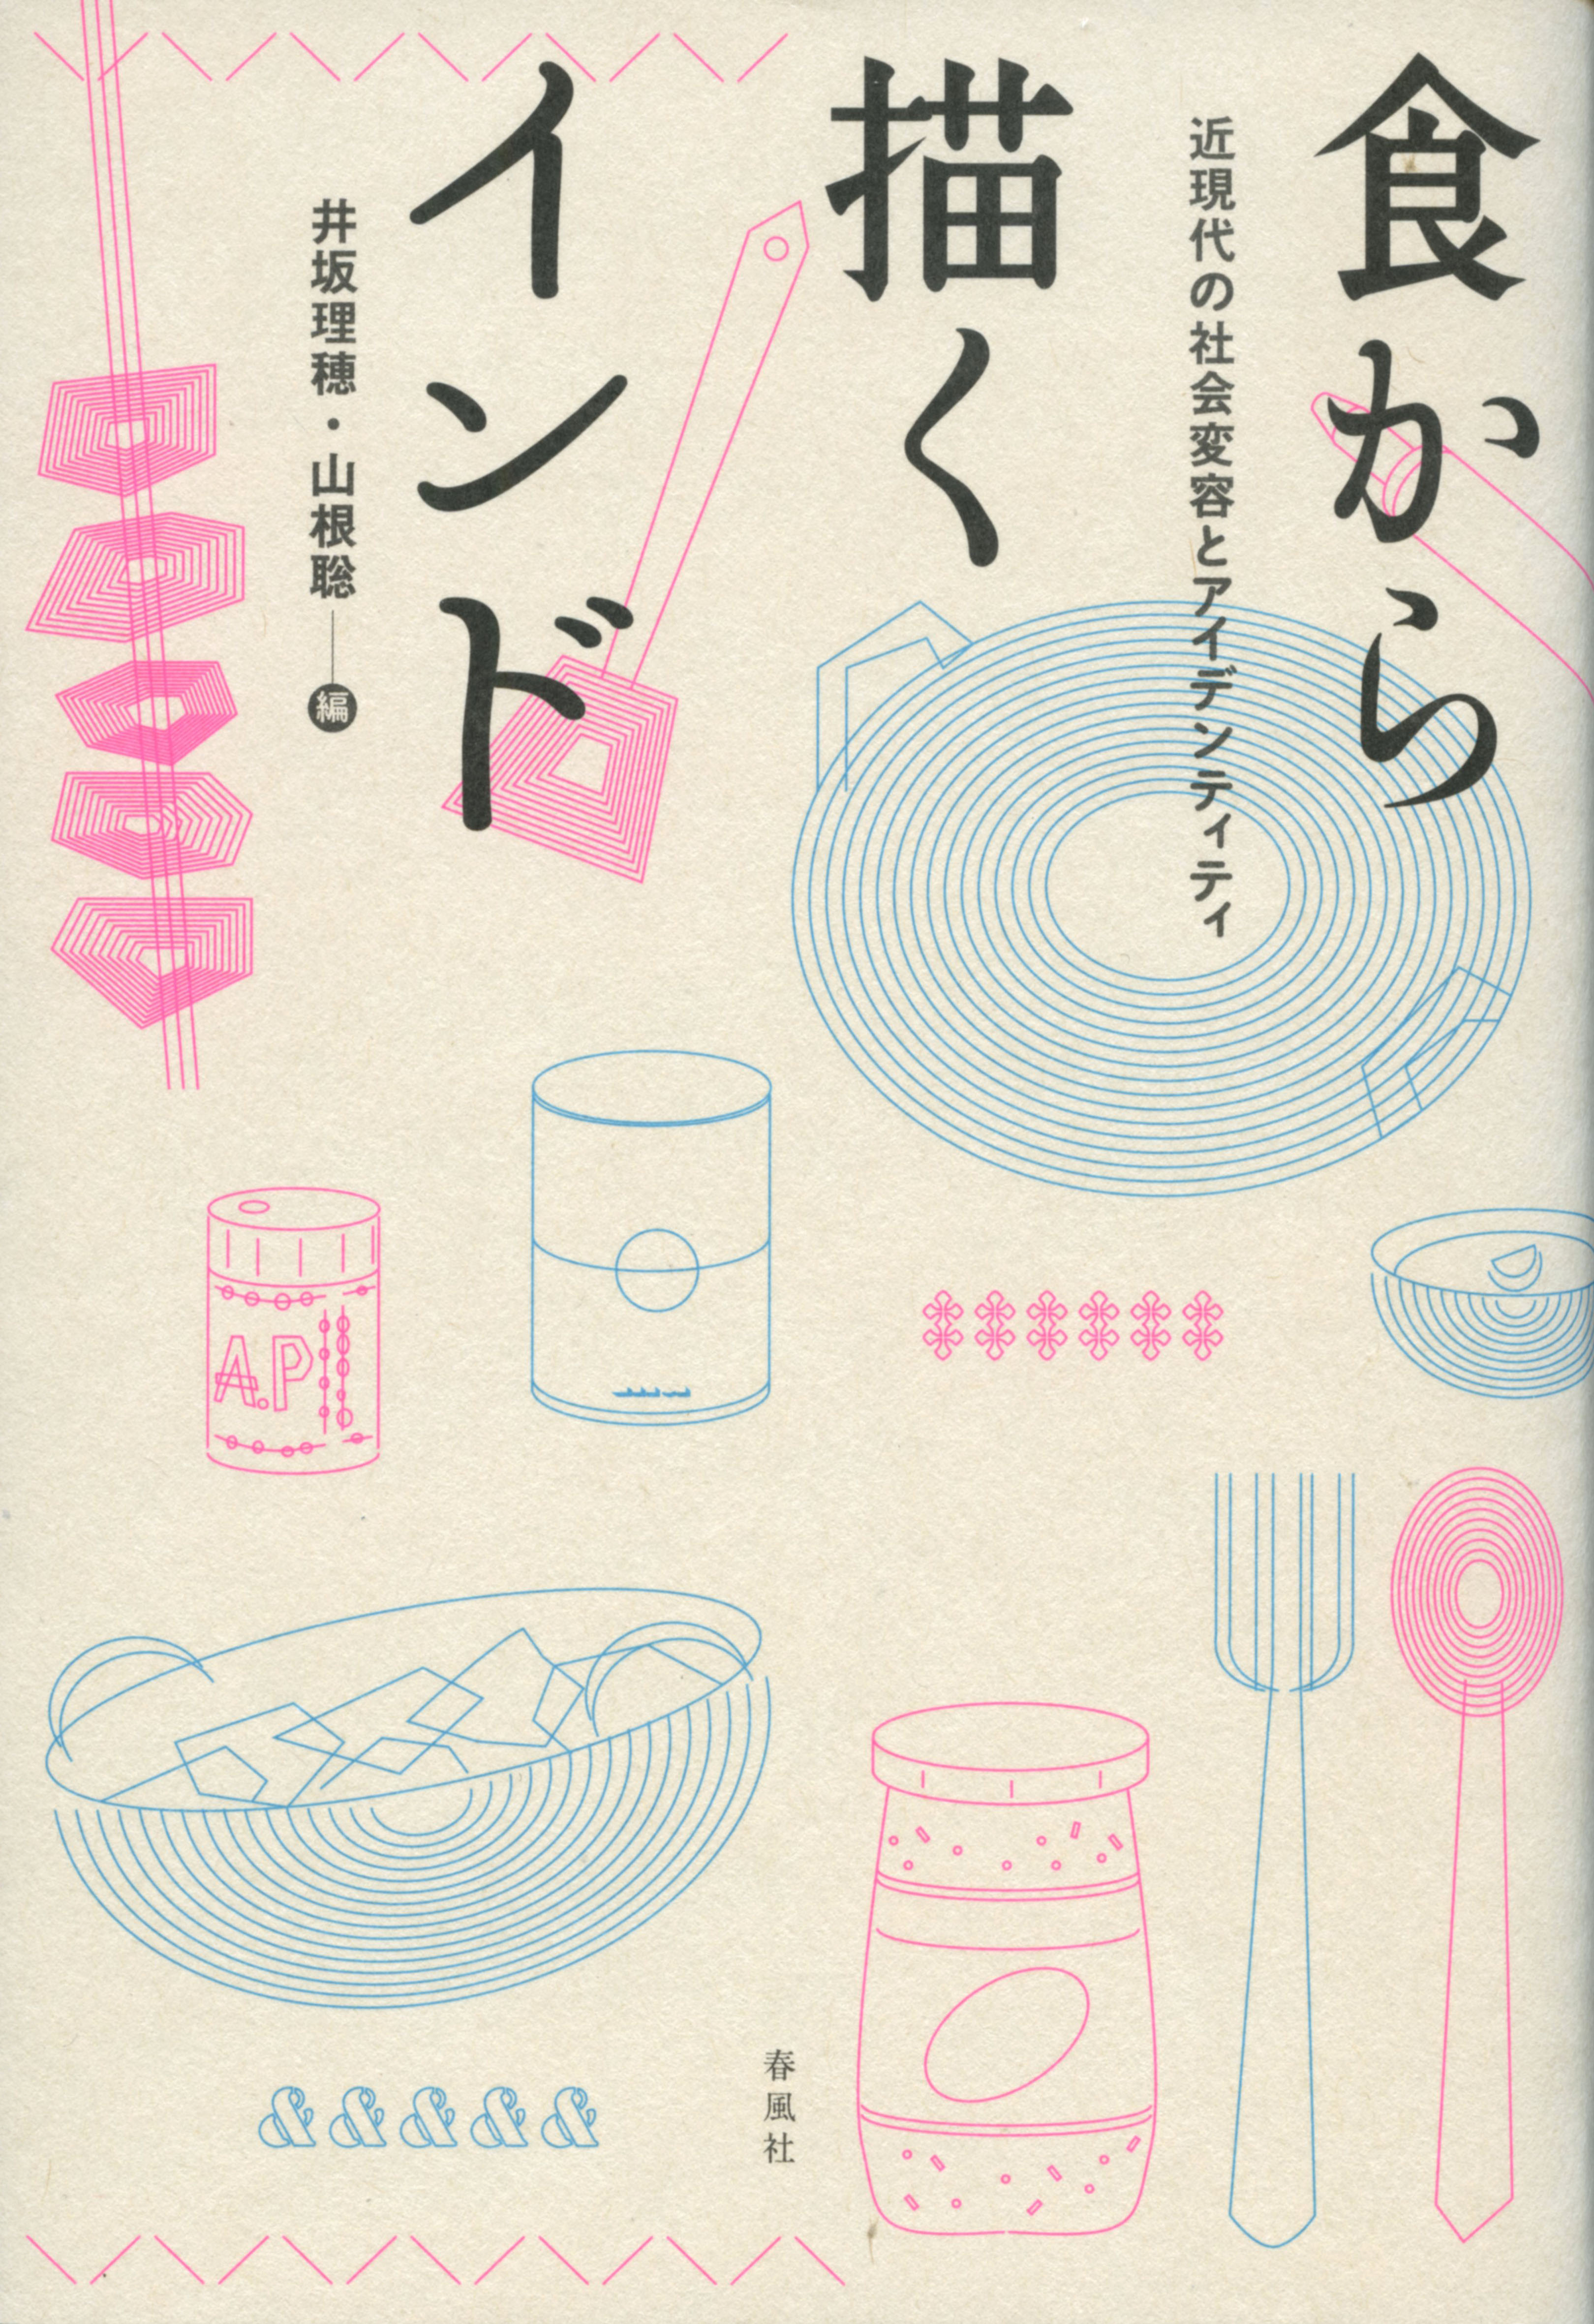 pink and light blue line drawings on a beige cover